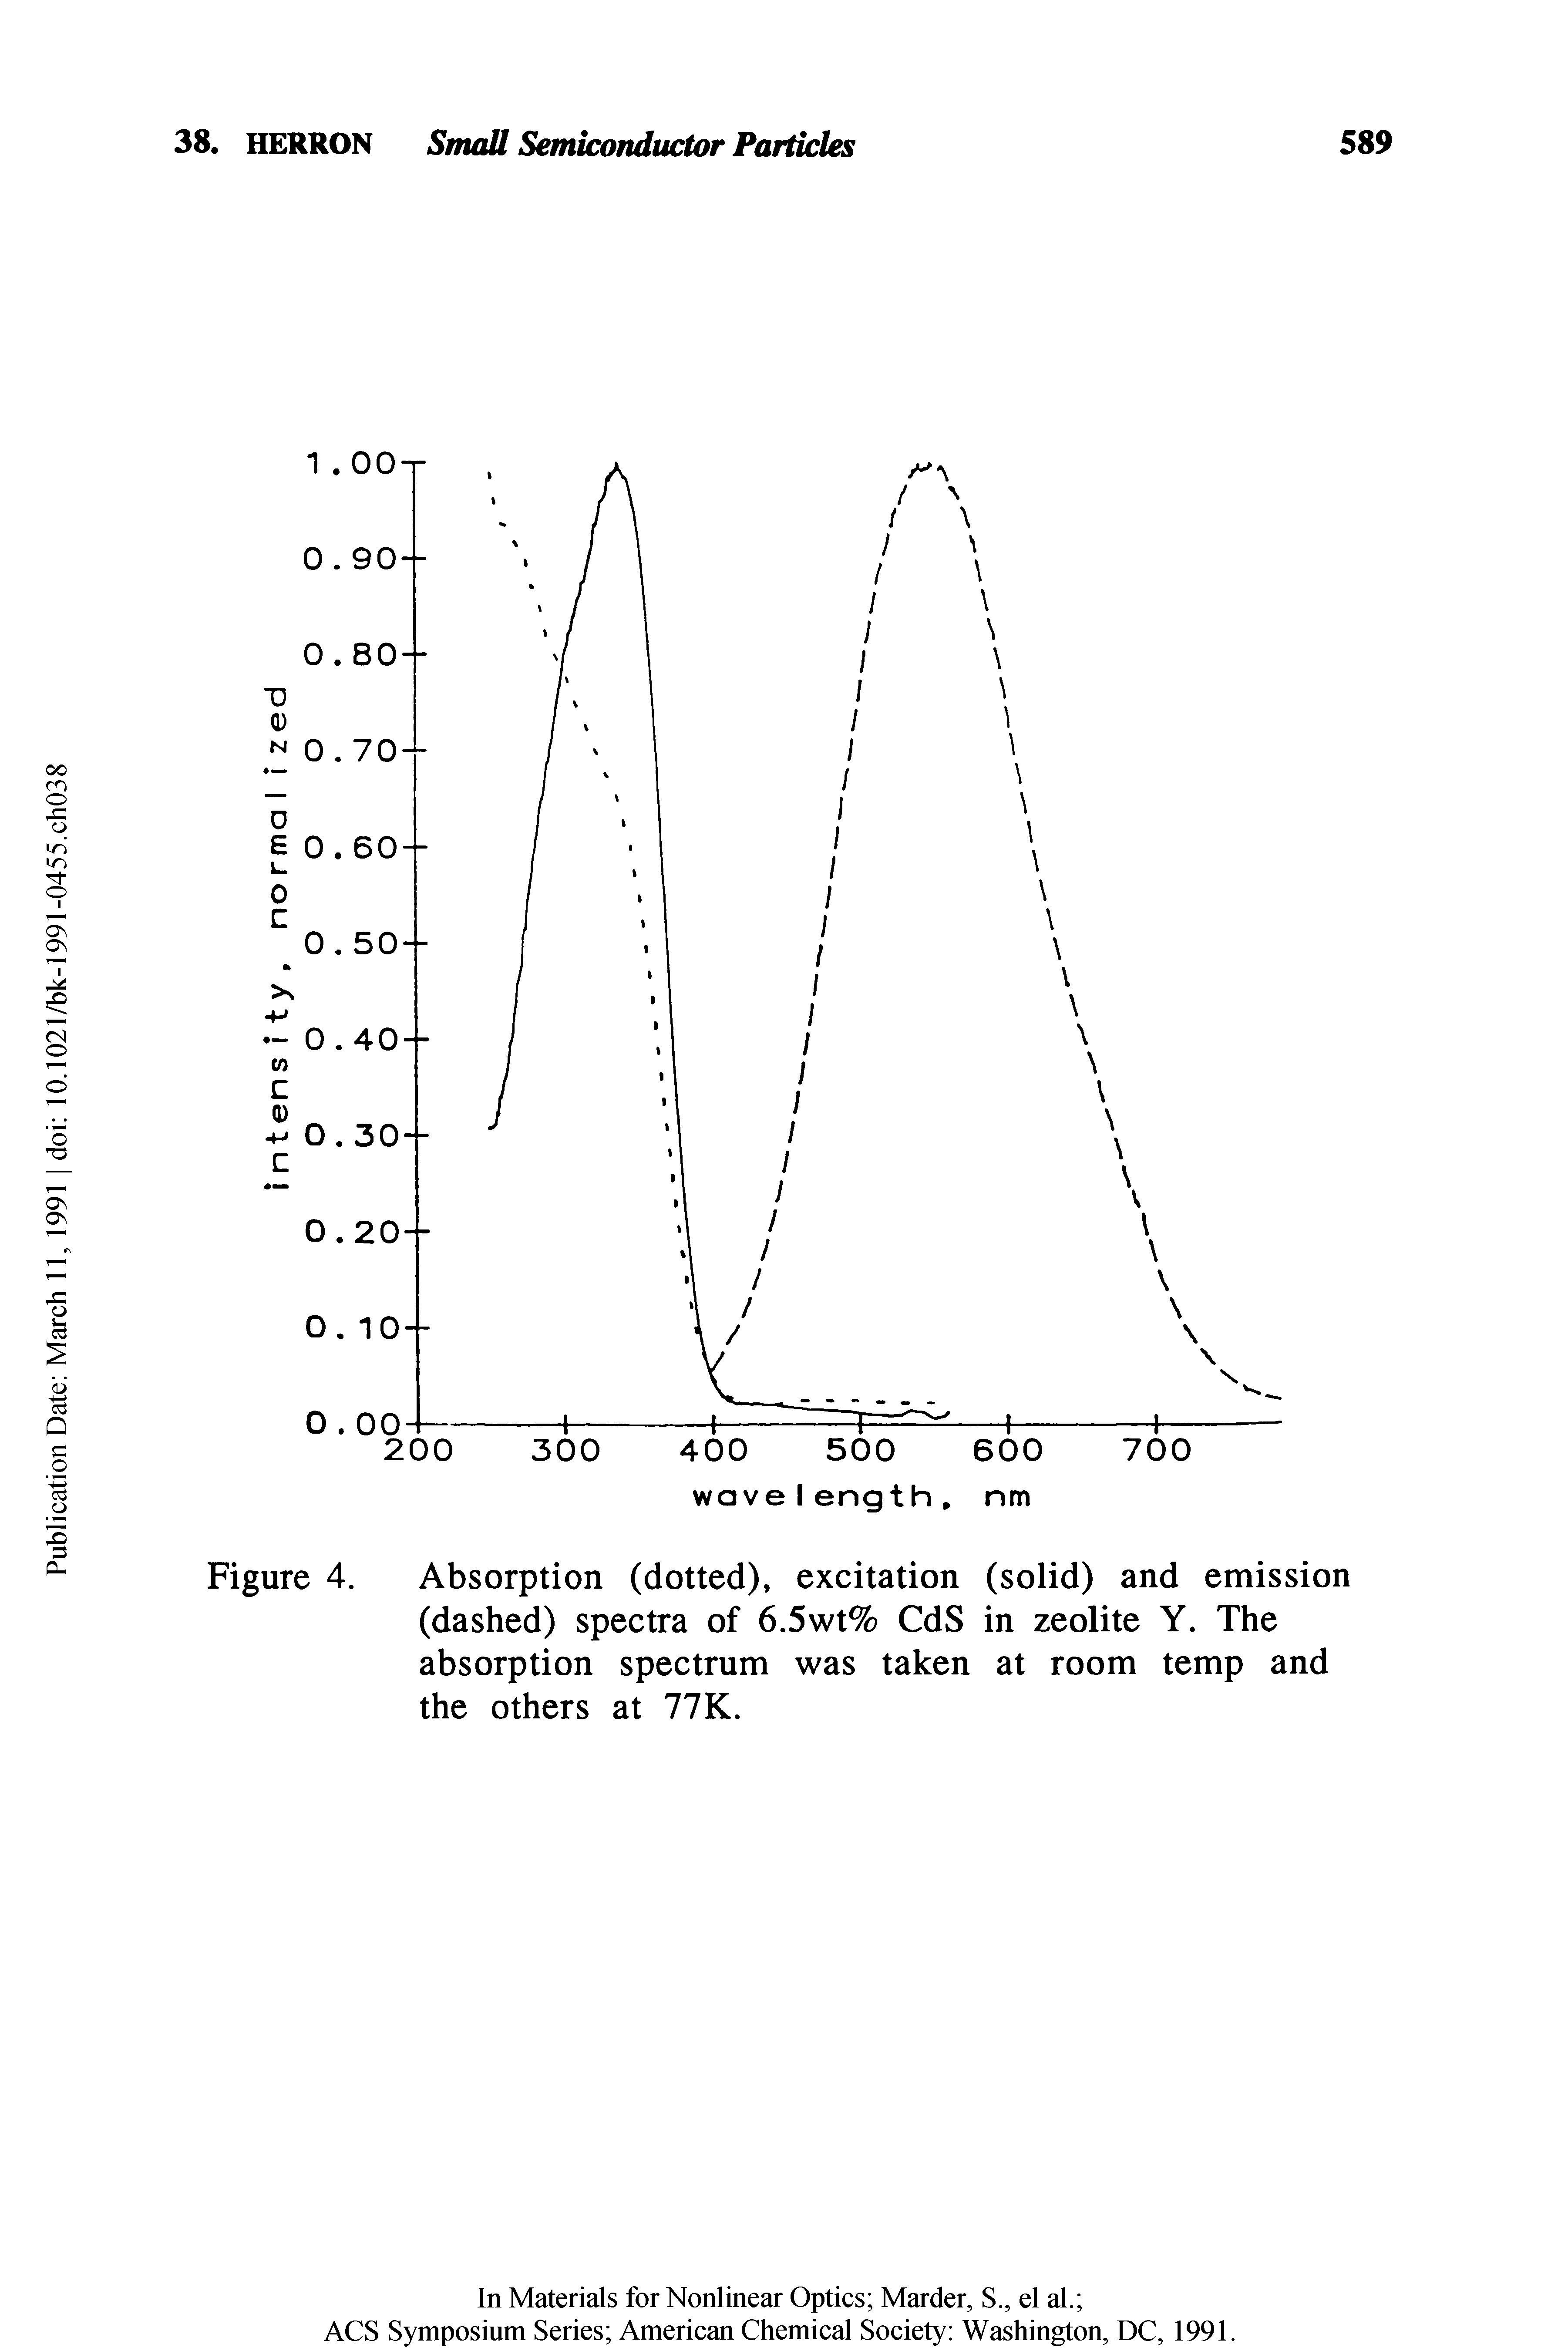 Figure 4. Absorption (dotted), excitation (solid) and emission (dashed) spectra of 6.5wt% CdS in zeolite Y. The absorption spectrum was taken at room temp and the others at 77K.